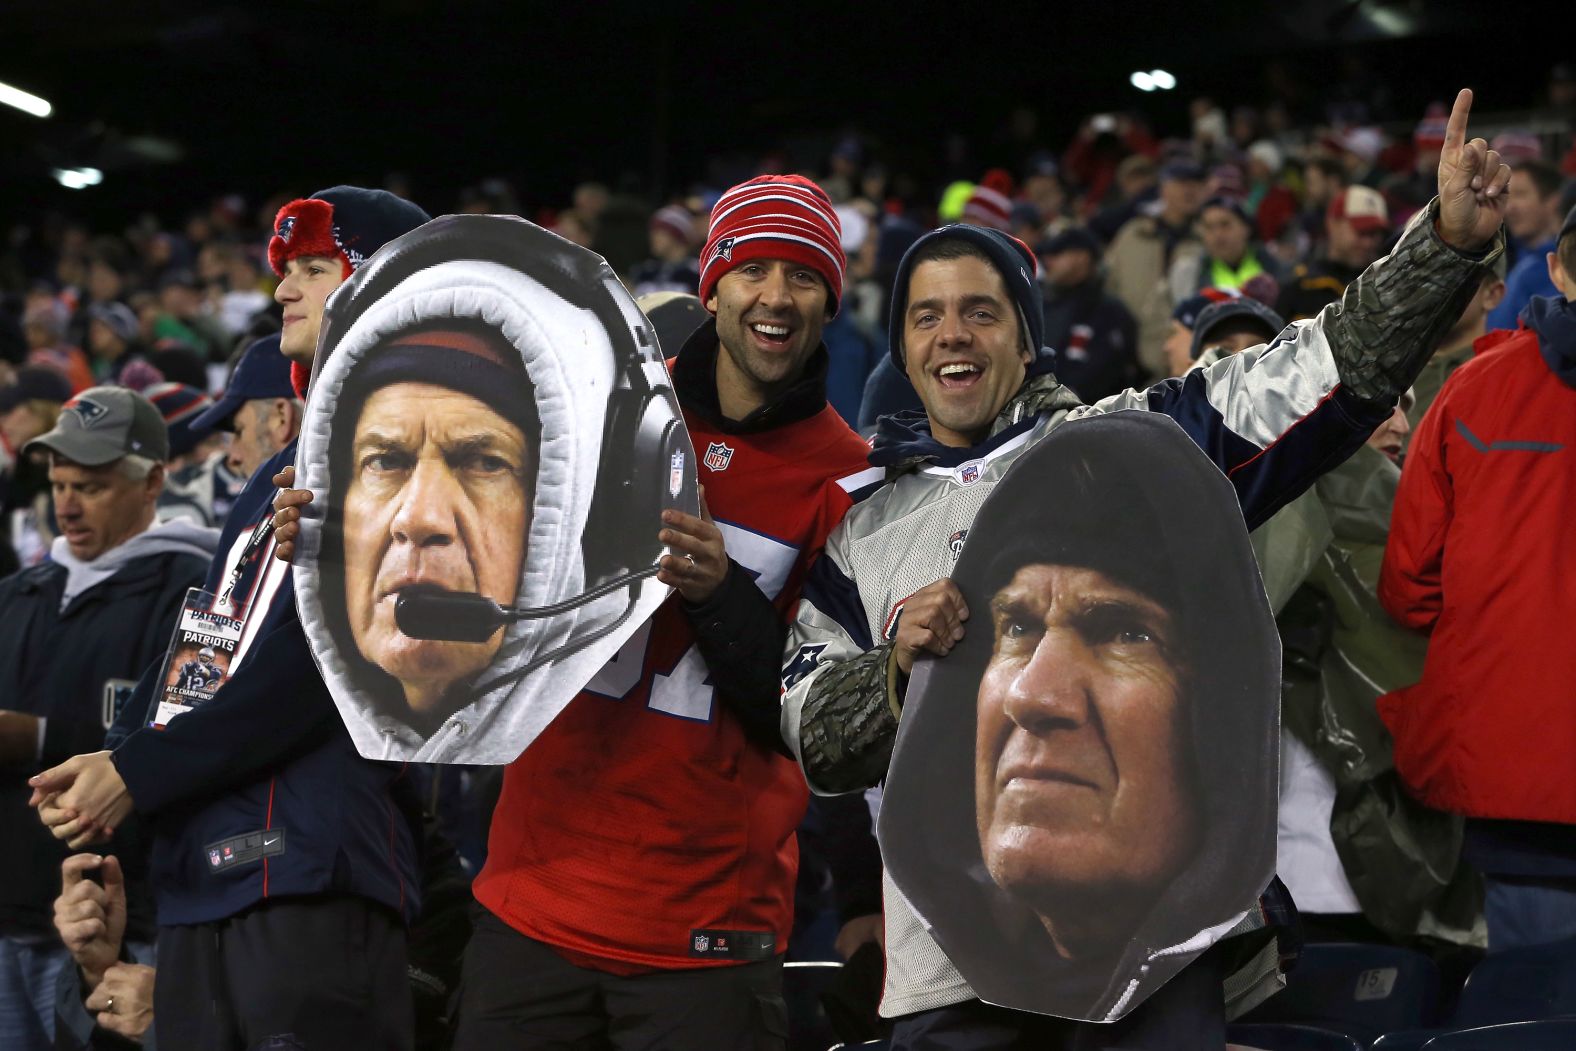 Patriots fans hold cutouts of Belichick's face before the AFC Championship Game in 2015.